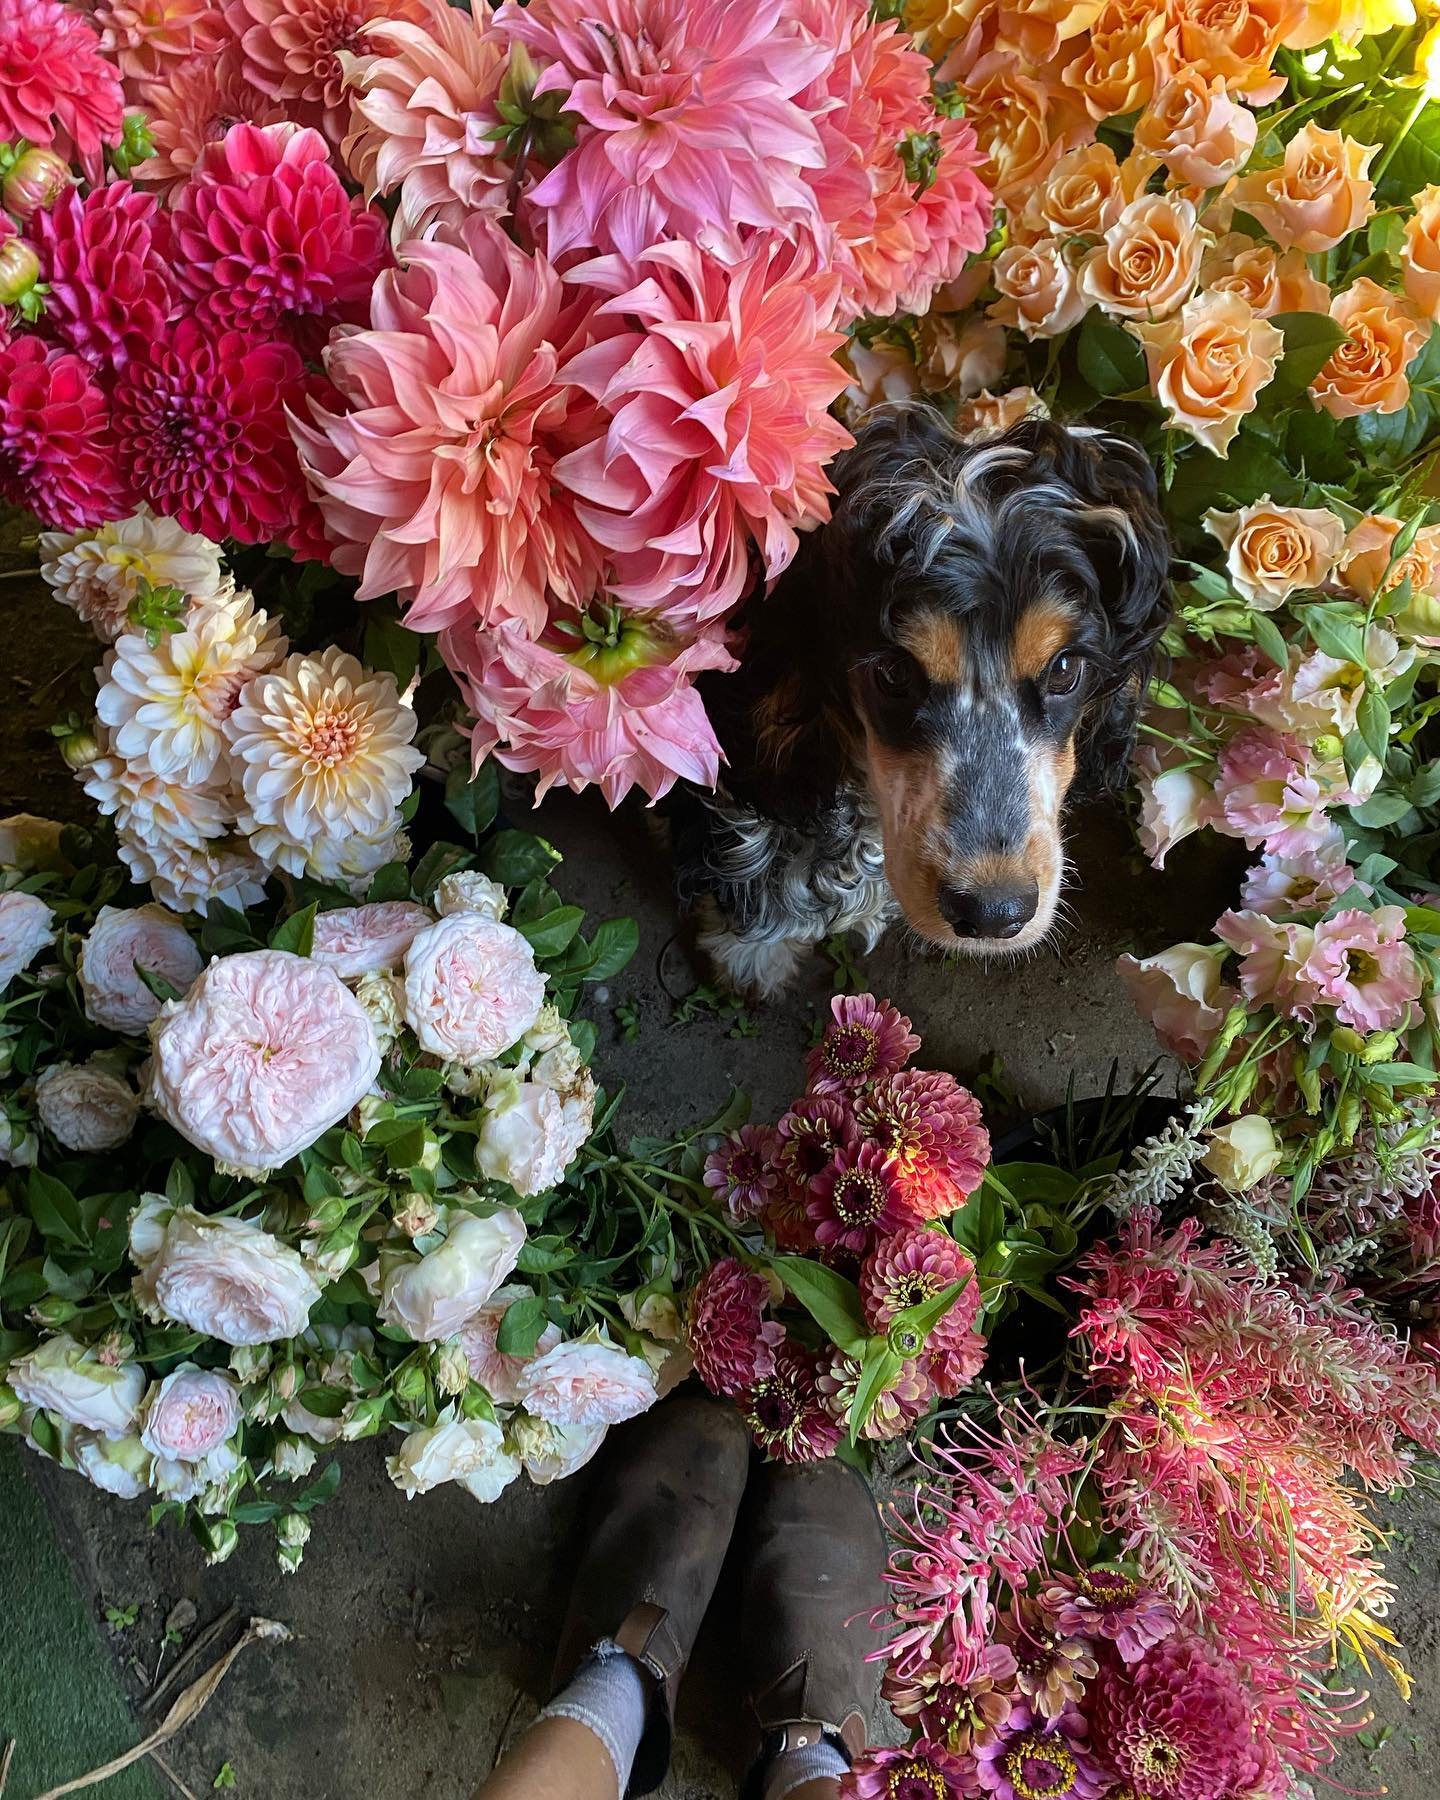 So many beautiful tones and locally grown blooms for Bel and Mike says Barry&hellip;

🌸 Dahlias

🌸 Garden roses

🌸 Grevillea 

🌸 Zinnia 

And many more&hellip; love our local flower growers.